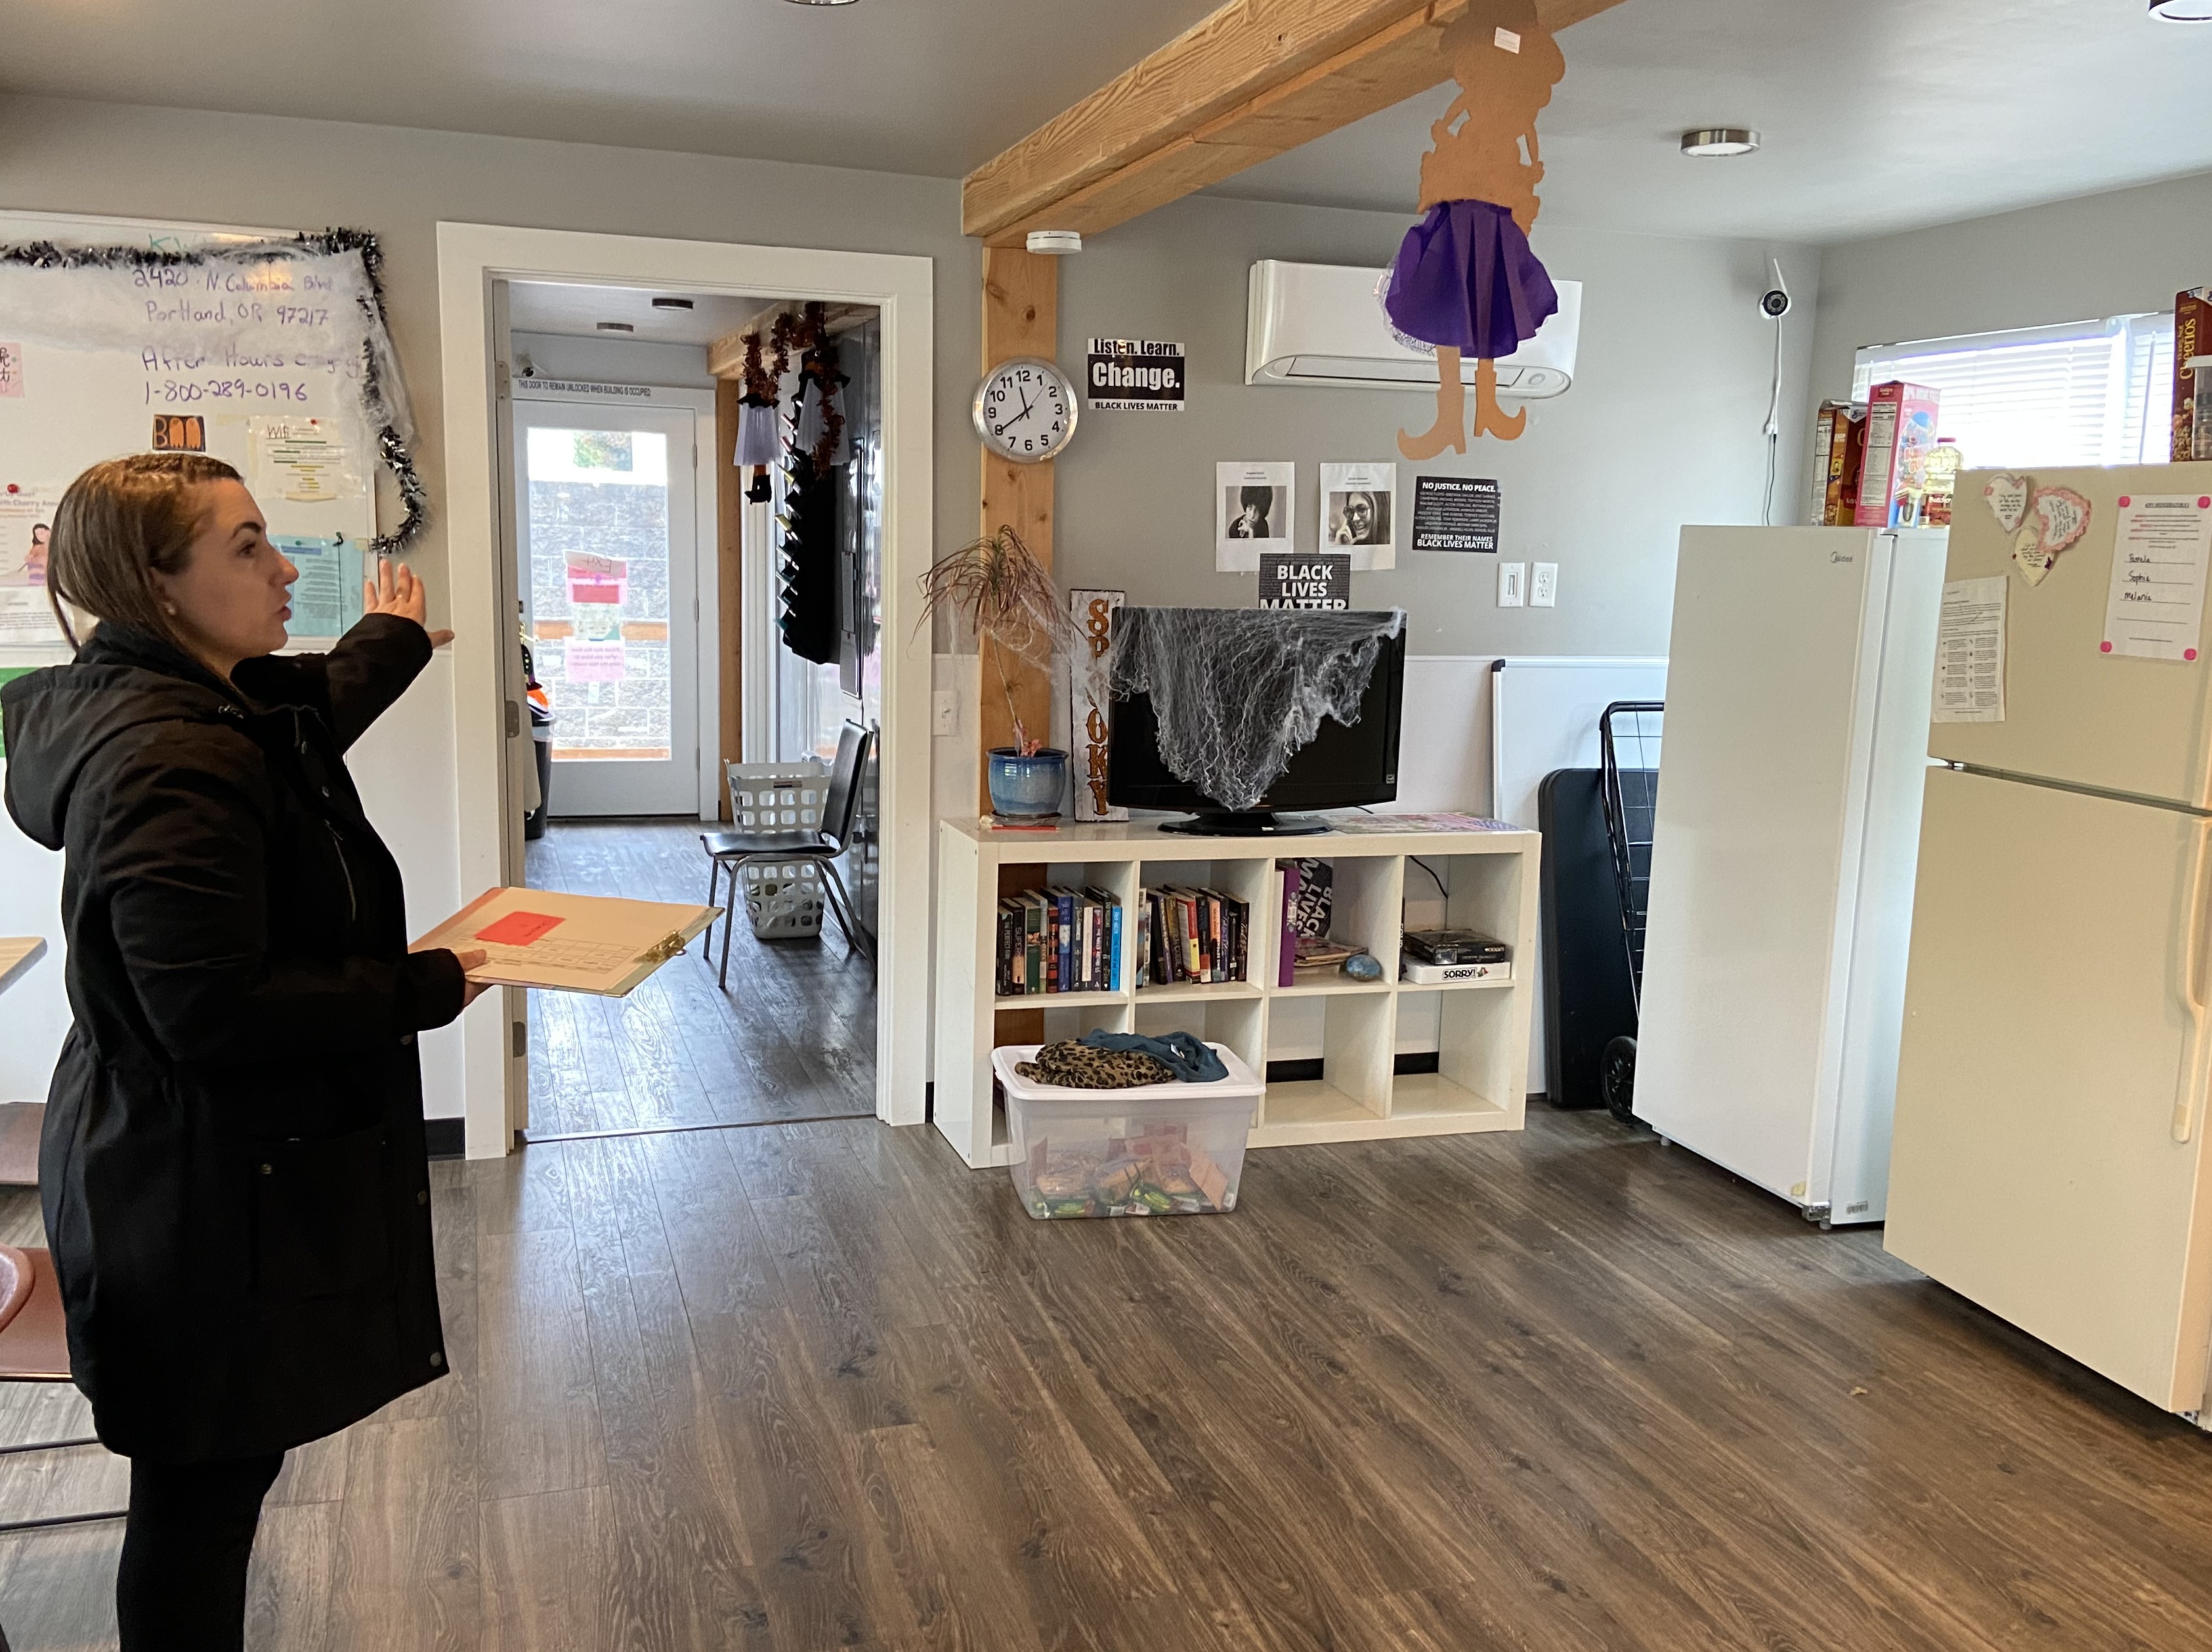 Woman gives tour of community kitchen